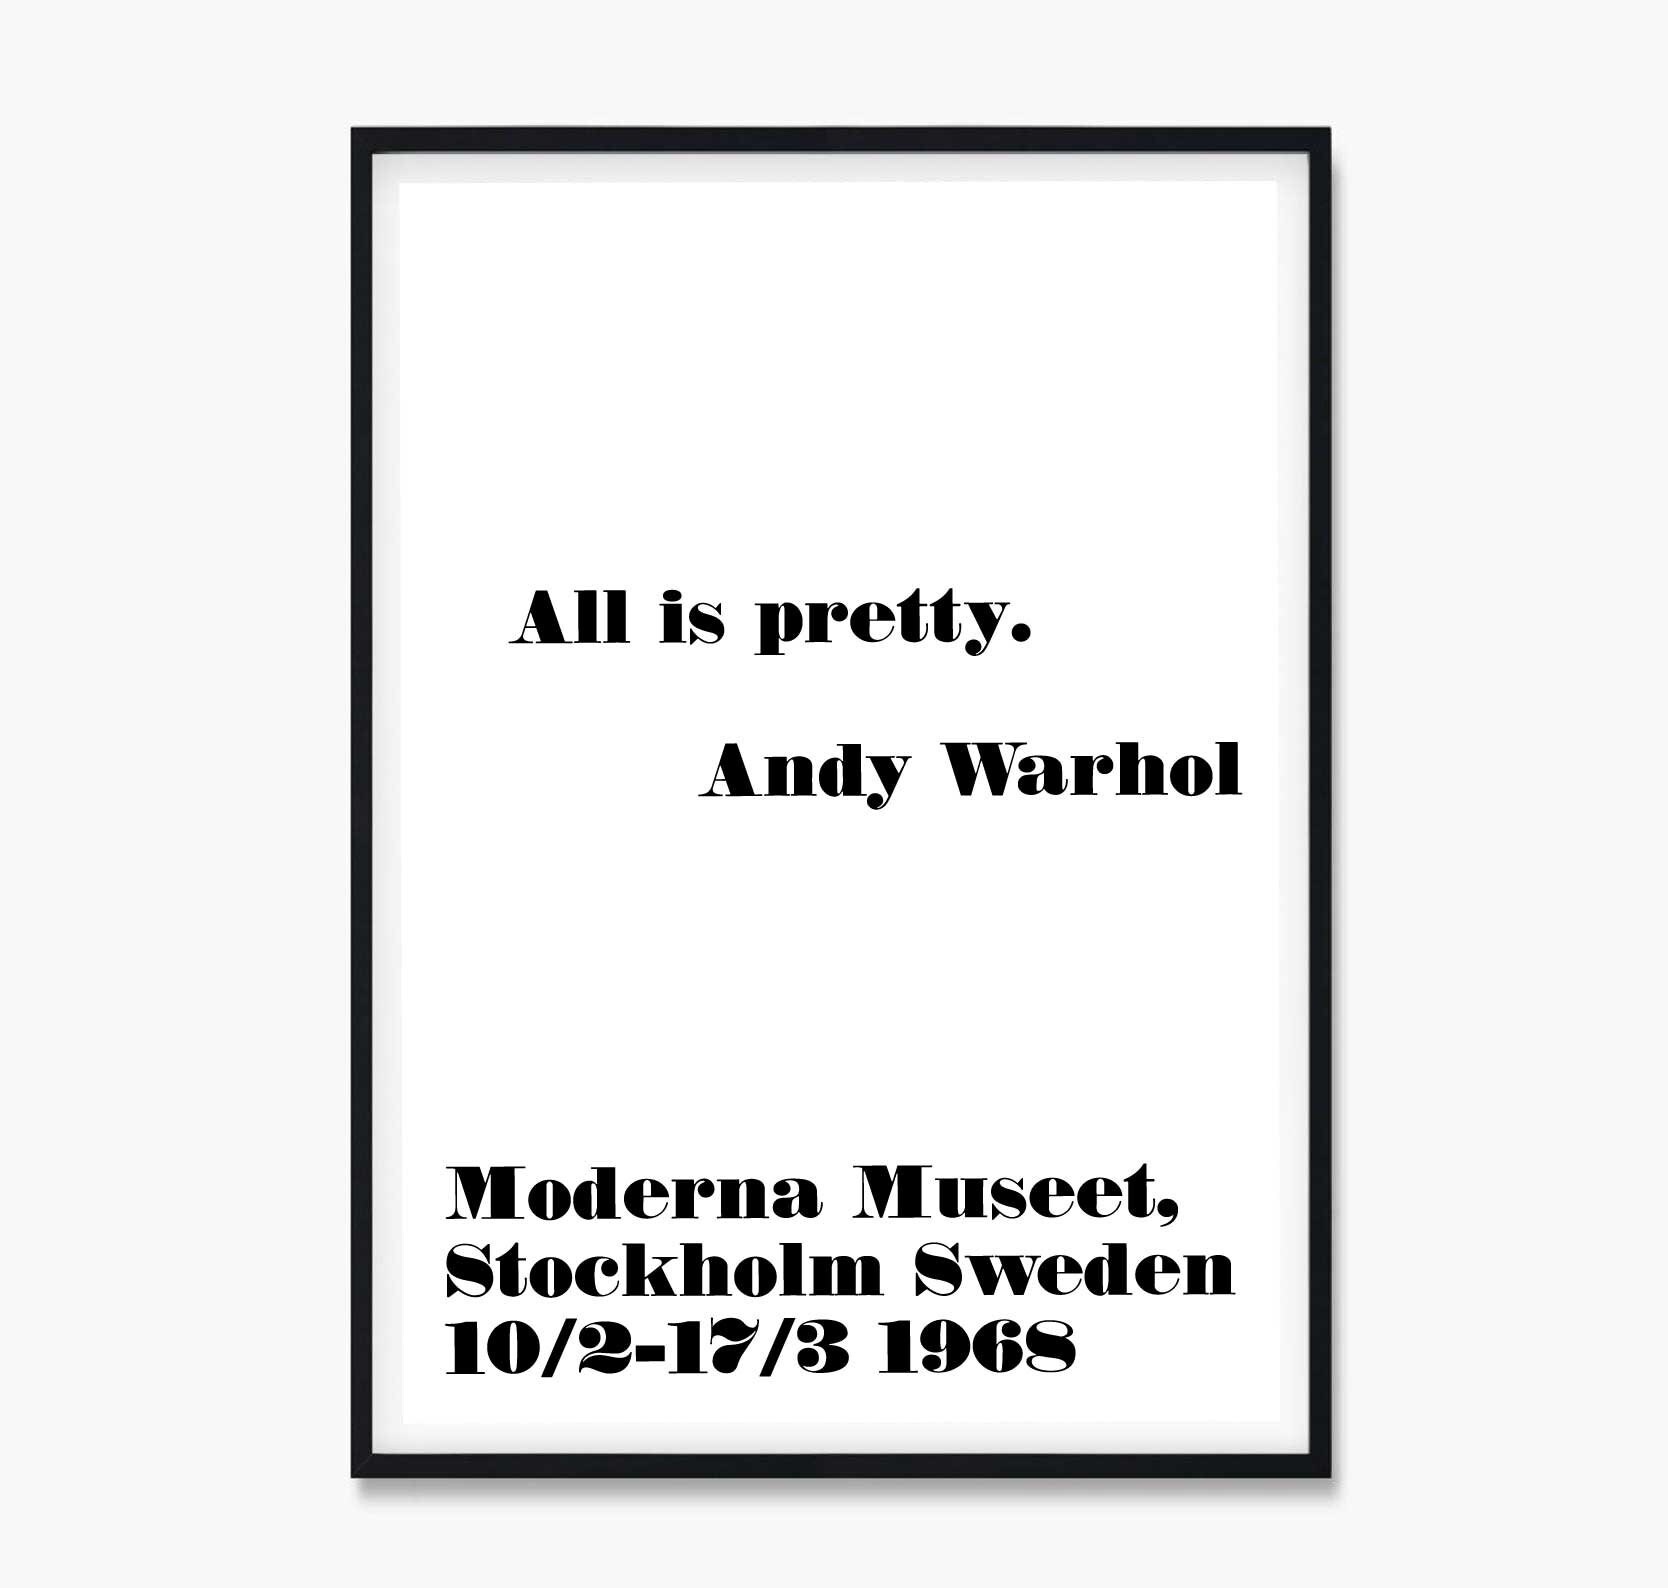 All is Pretty Poster is Pretty Andy Warhol Quote -